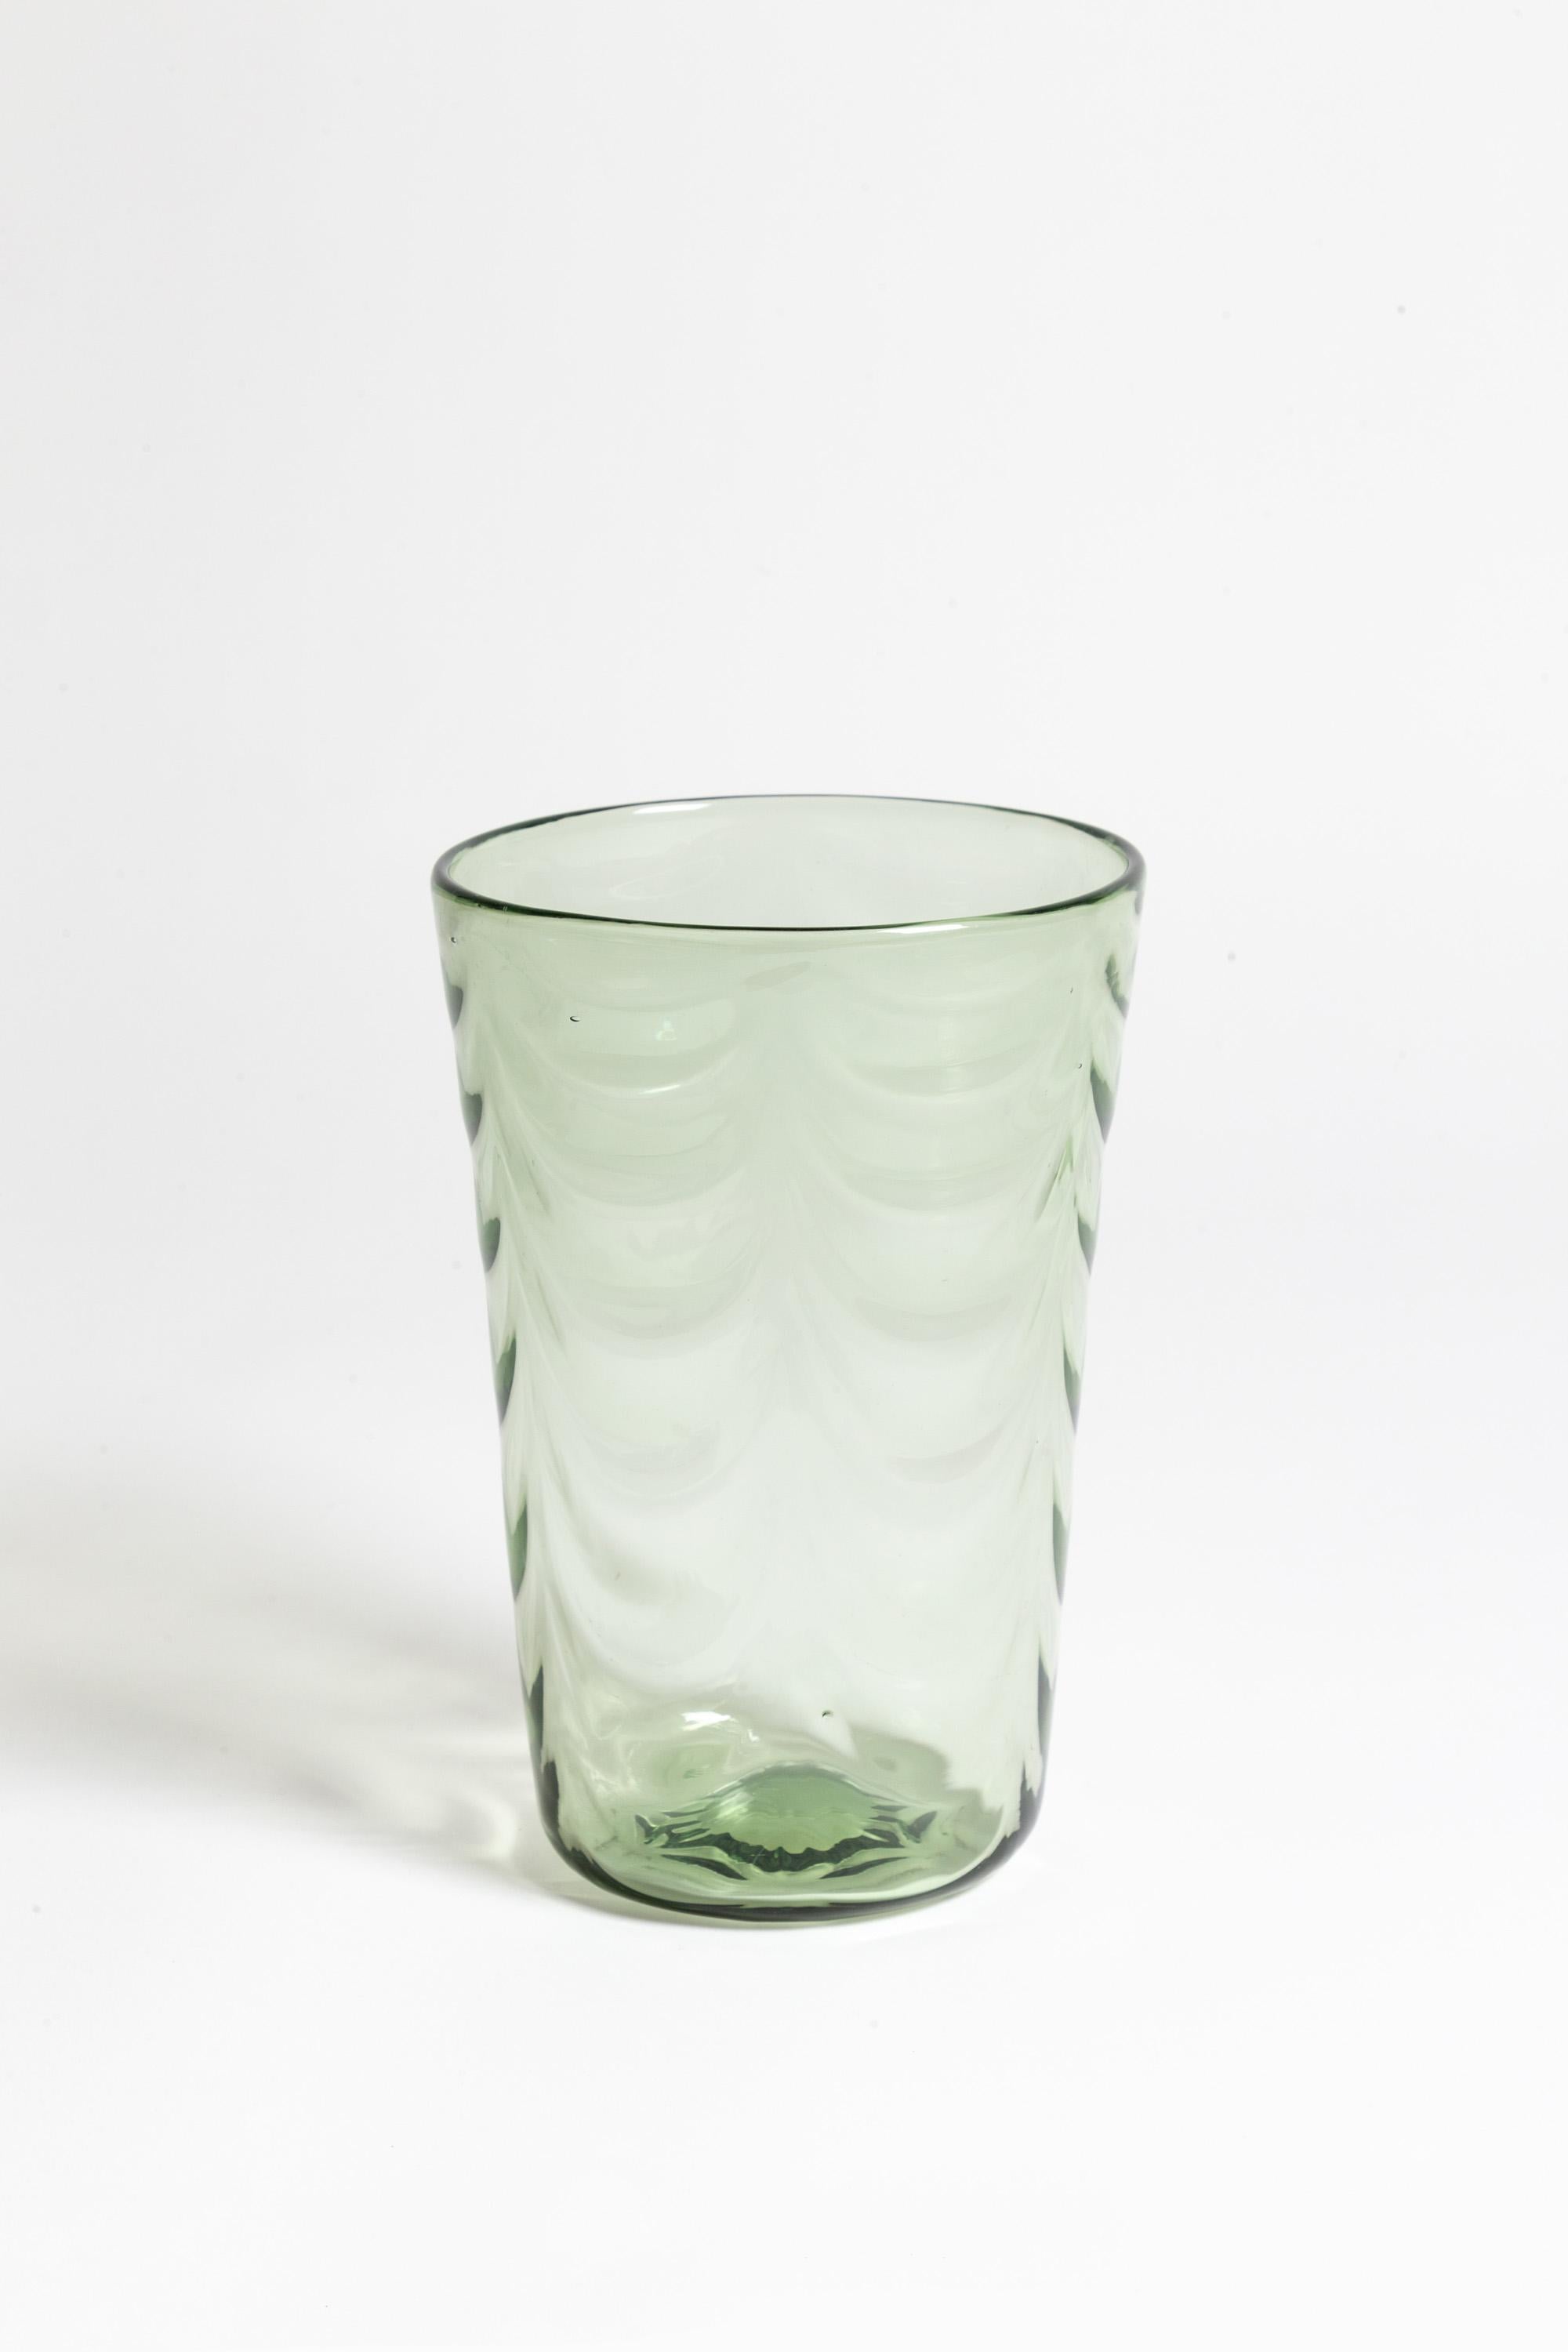 A Sea Green Whitefriars glass wave vase designed by Marriot Powell c.1930.

Design no. 8437.

Good overall condition with no chips or scratches to the body of the vase. Minor scuffing to the base commensurate with age and use.